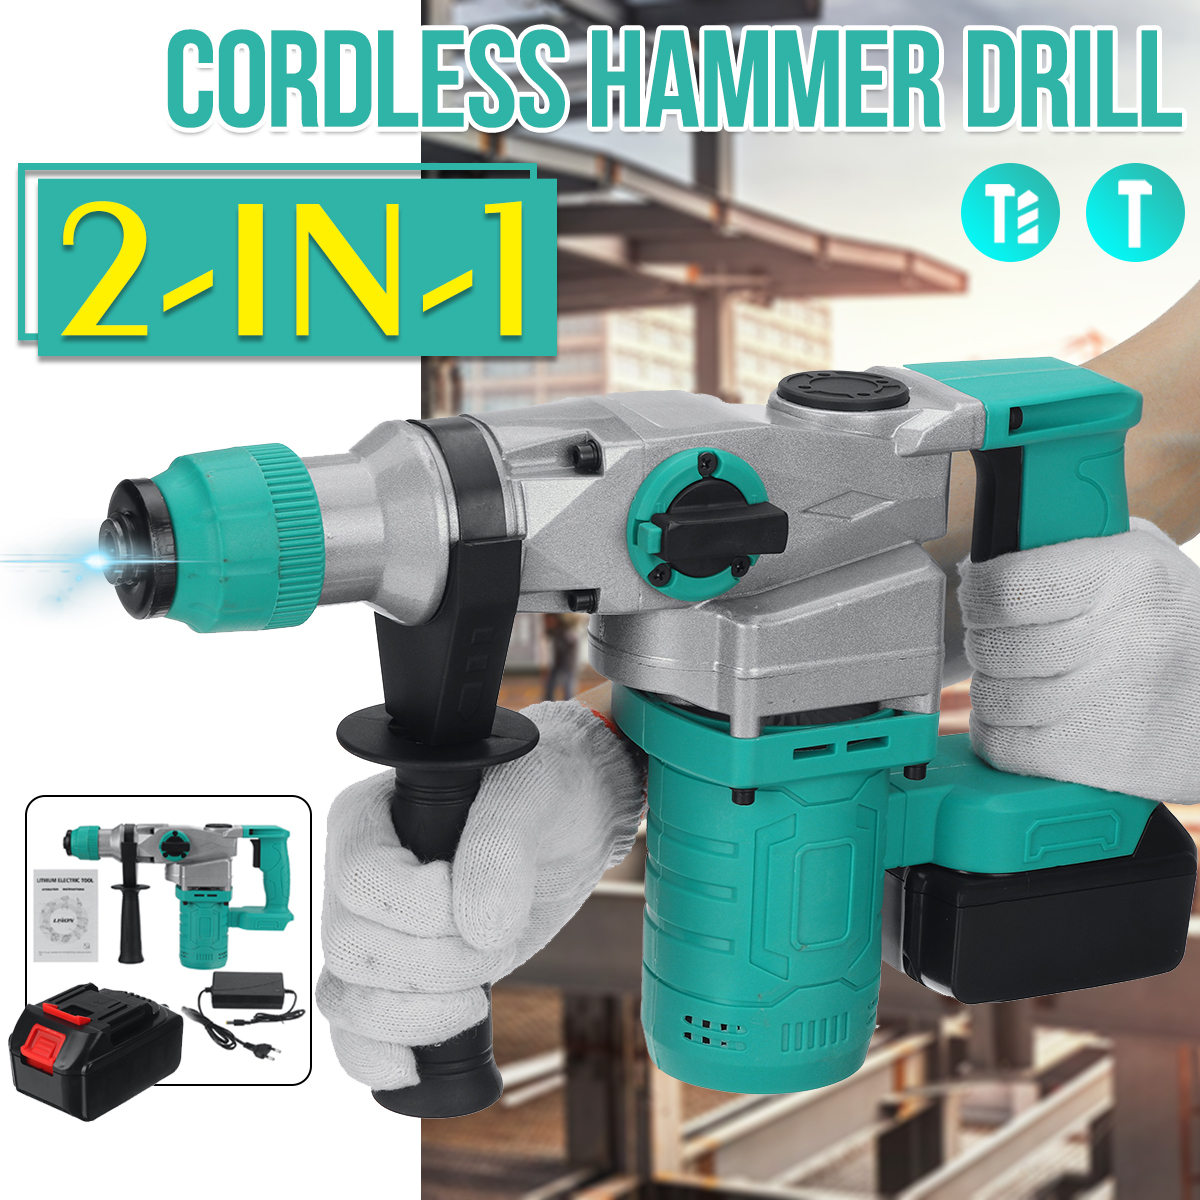 Brushless-Cordless-Electric-Hammer-Drill-Wood-Concrete-Wall-Drilling-Slotting-Tool-W-None-or-1pc-Bat-1878668-2